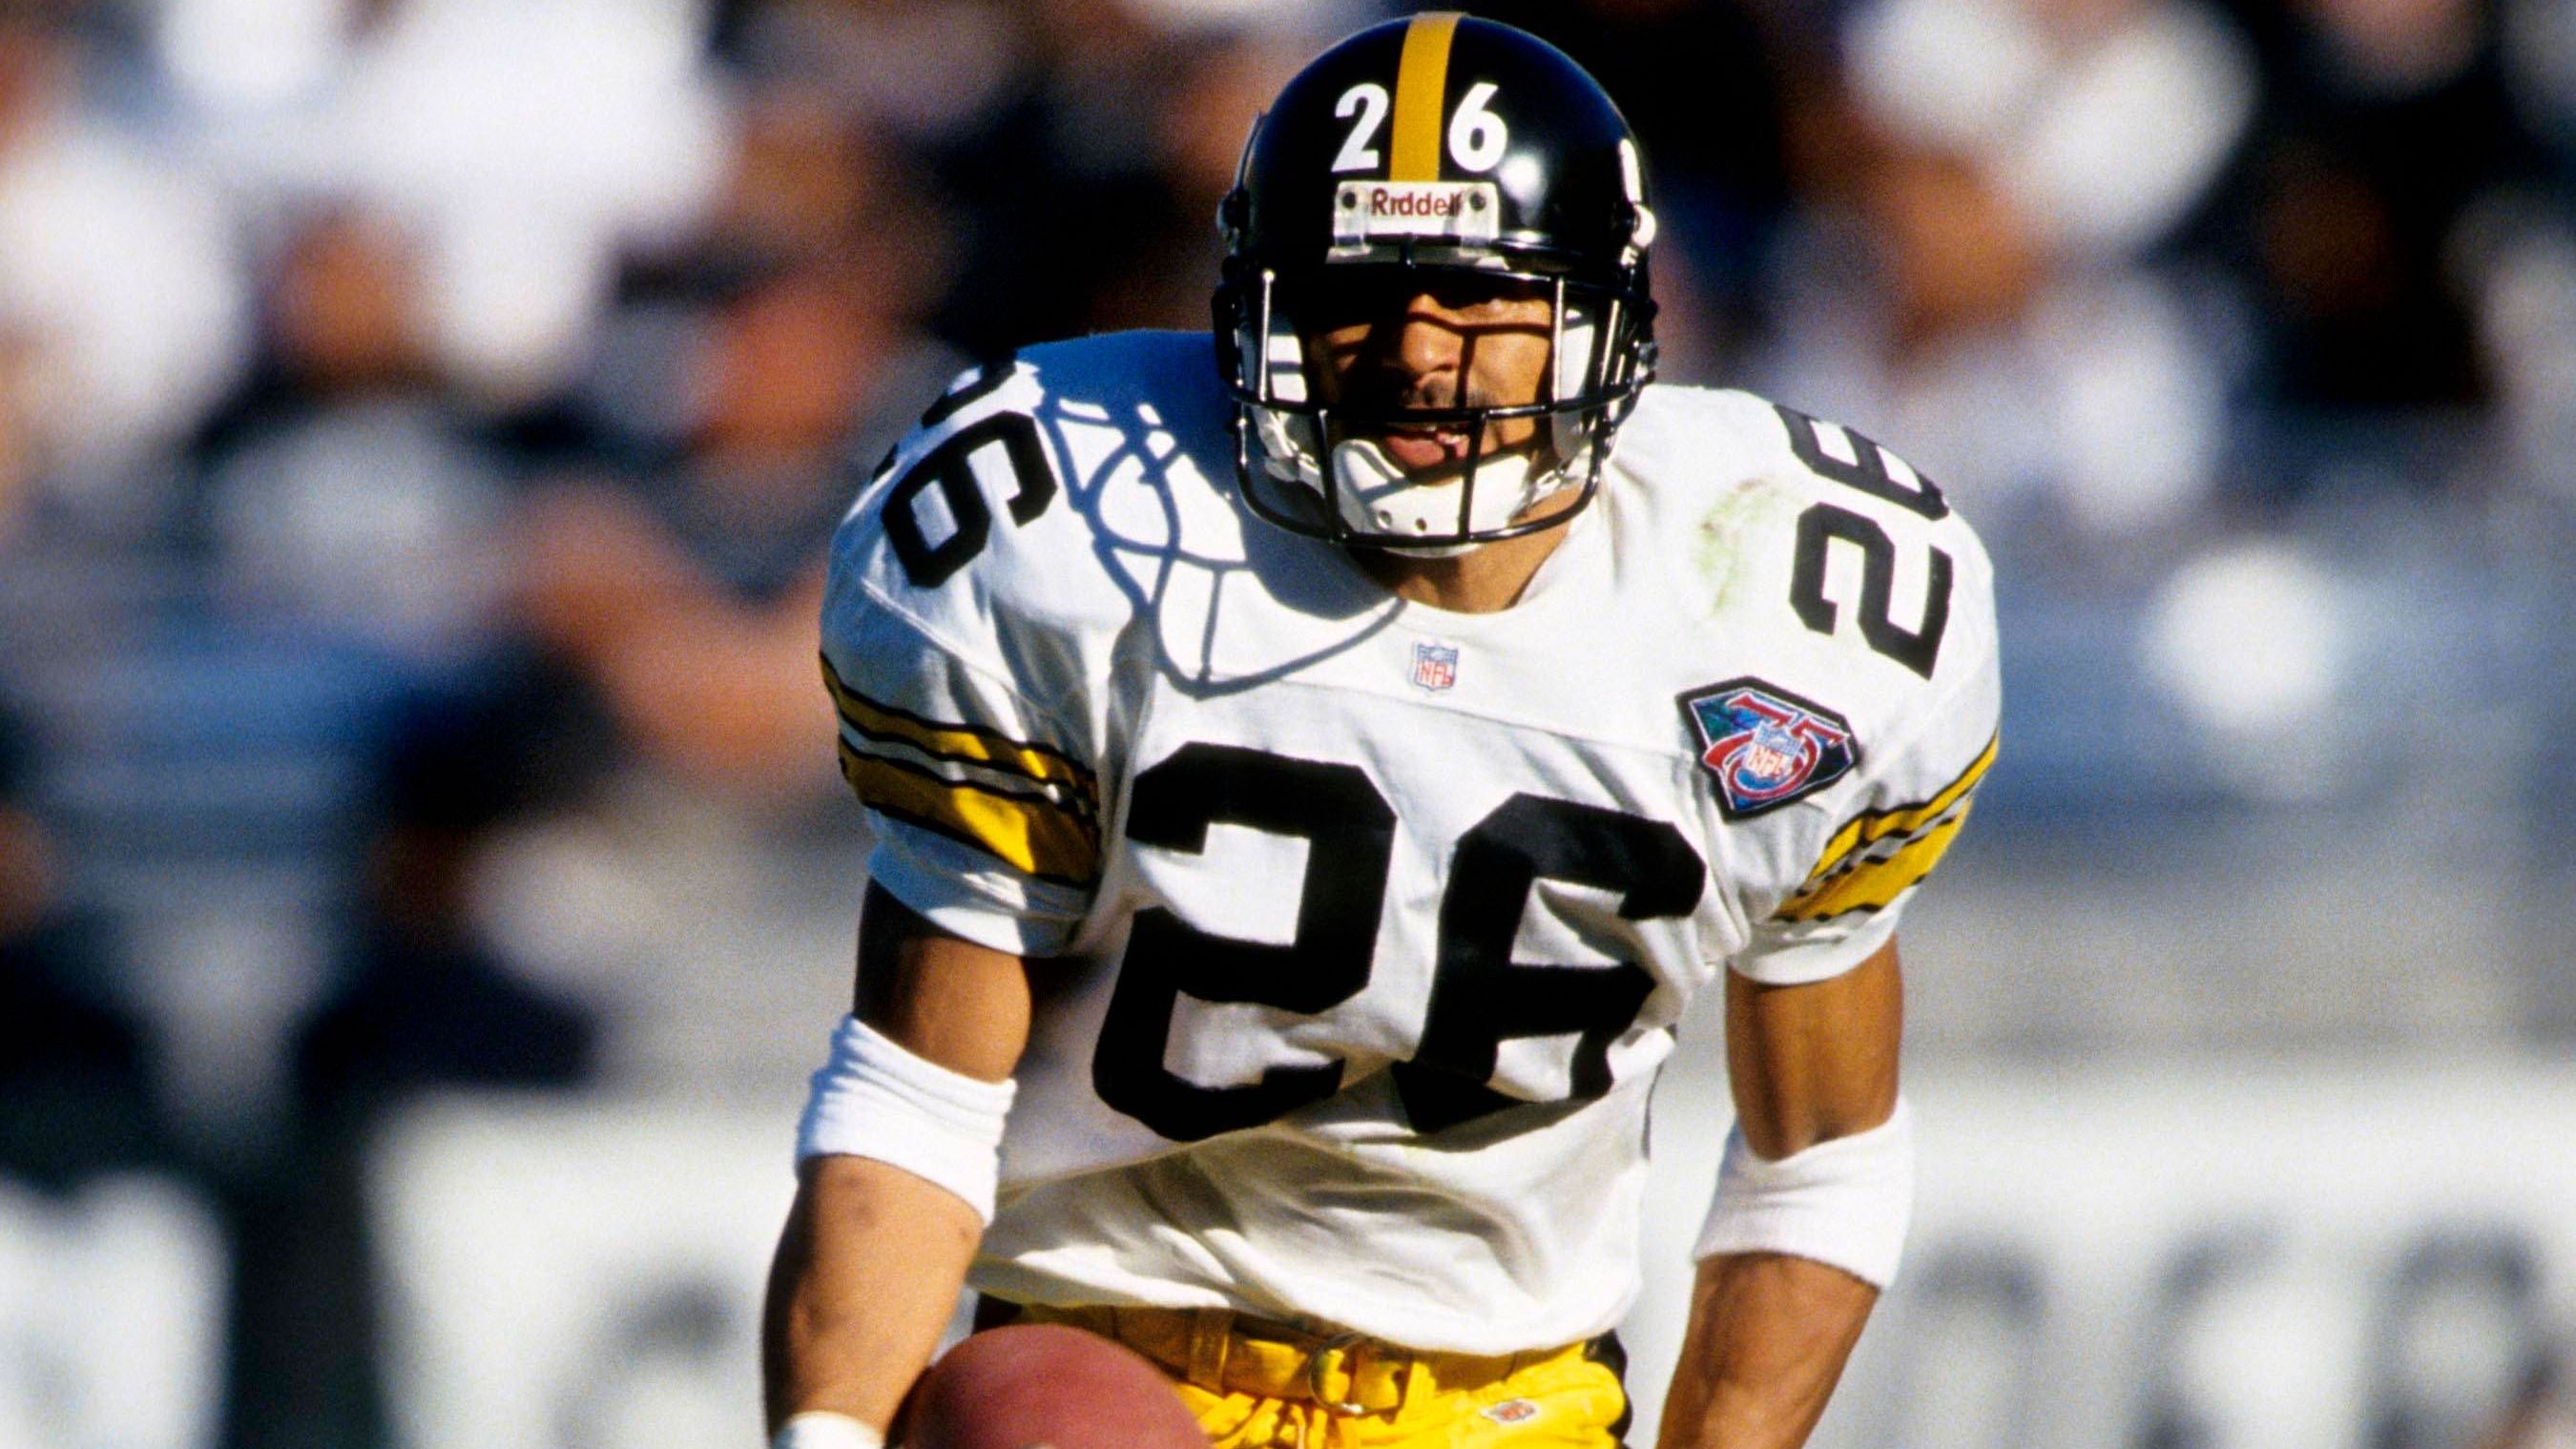 <strong>26: Rod Woodson</strong><br>Teams: Pittsburgh Steelers, San Francisco 49ers, Baltimore Ravens, Oakland Raiders<br>Position: Cornerback<br>Erfolge: Pro Football Hall of Famer, Super-Bowl-Champion 2001, 1993 NFL Defensive Player of the Year, elfmaliger Pro Bowler<br>Honorable Mentions: LeSean McCoy, Le'Veon Bell, Herb Adderley